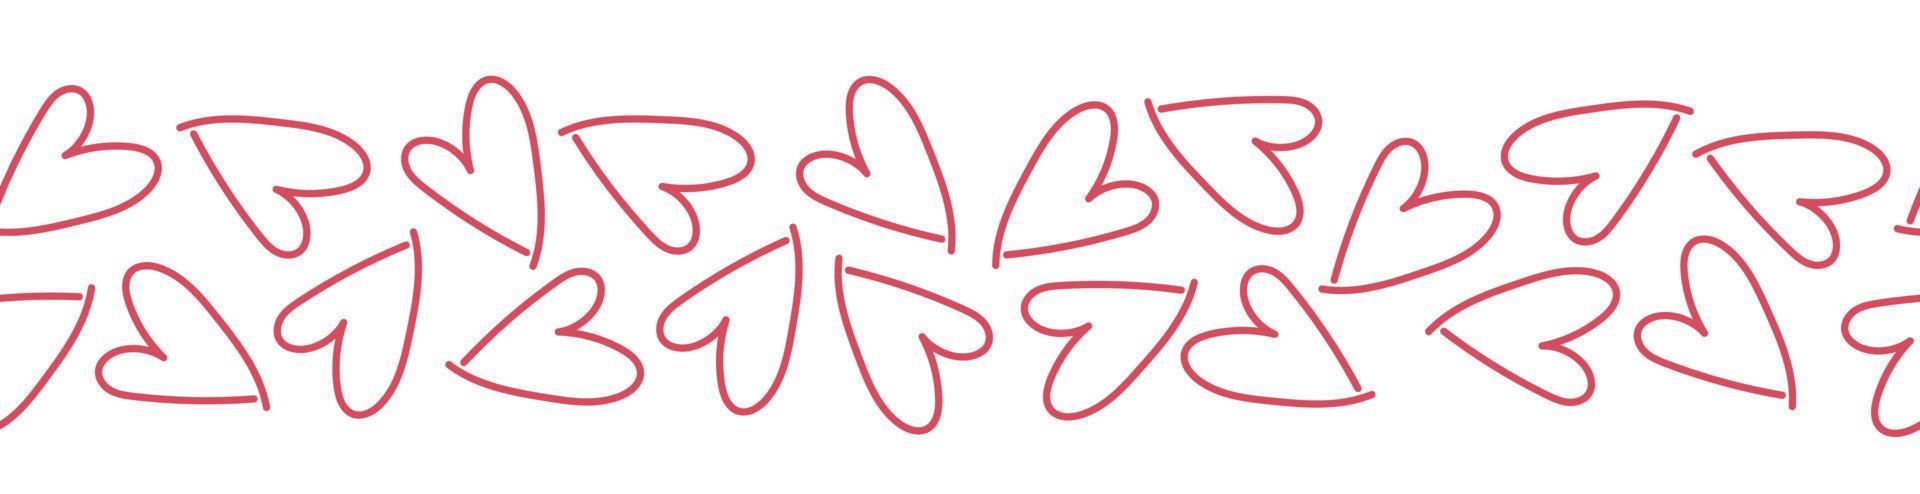 Seamless border with line art pink hearts. Hand drawn doodle style vector